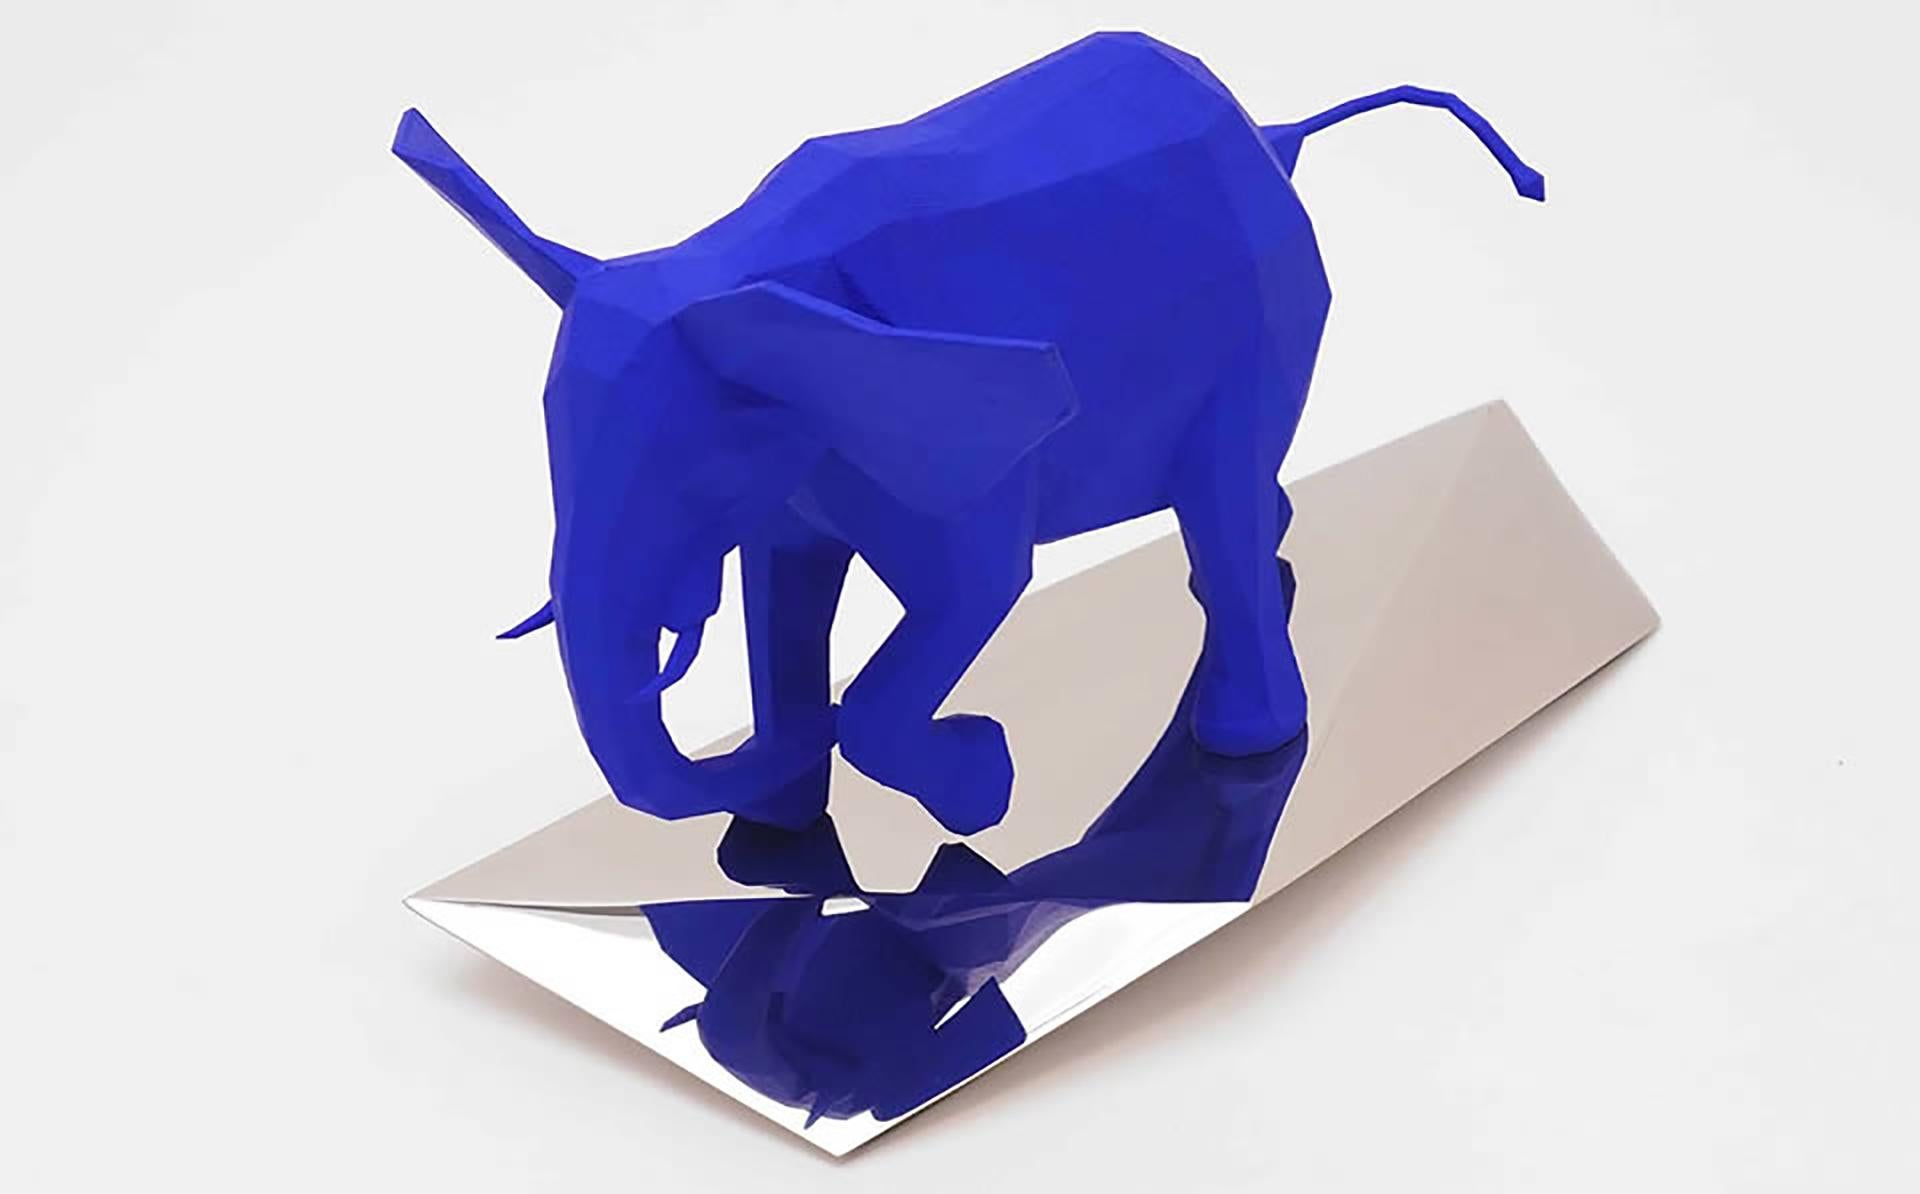 TITLE: Fraboom (Brutus)
ARTIST: Daniele Basso
YEAR: 2022
MEDIUM TYPE: Sculpture
MEDIUM/MATERIALS: Blue resin and stainless Steel mirror finish by hands
DIMENSIONS: 42 x 25 x h 24 cm
WEIGHT: 3 kg

The elephant is truly amazing: the great physical